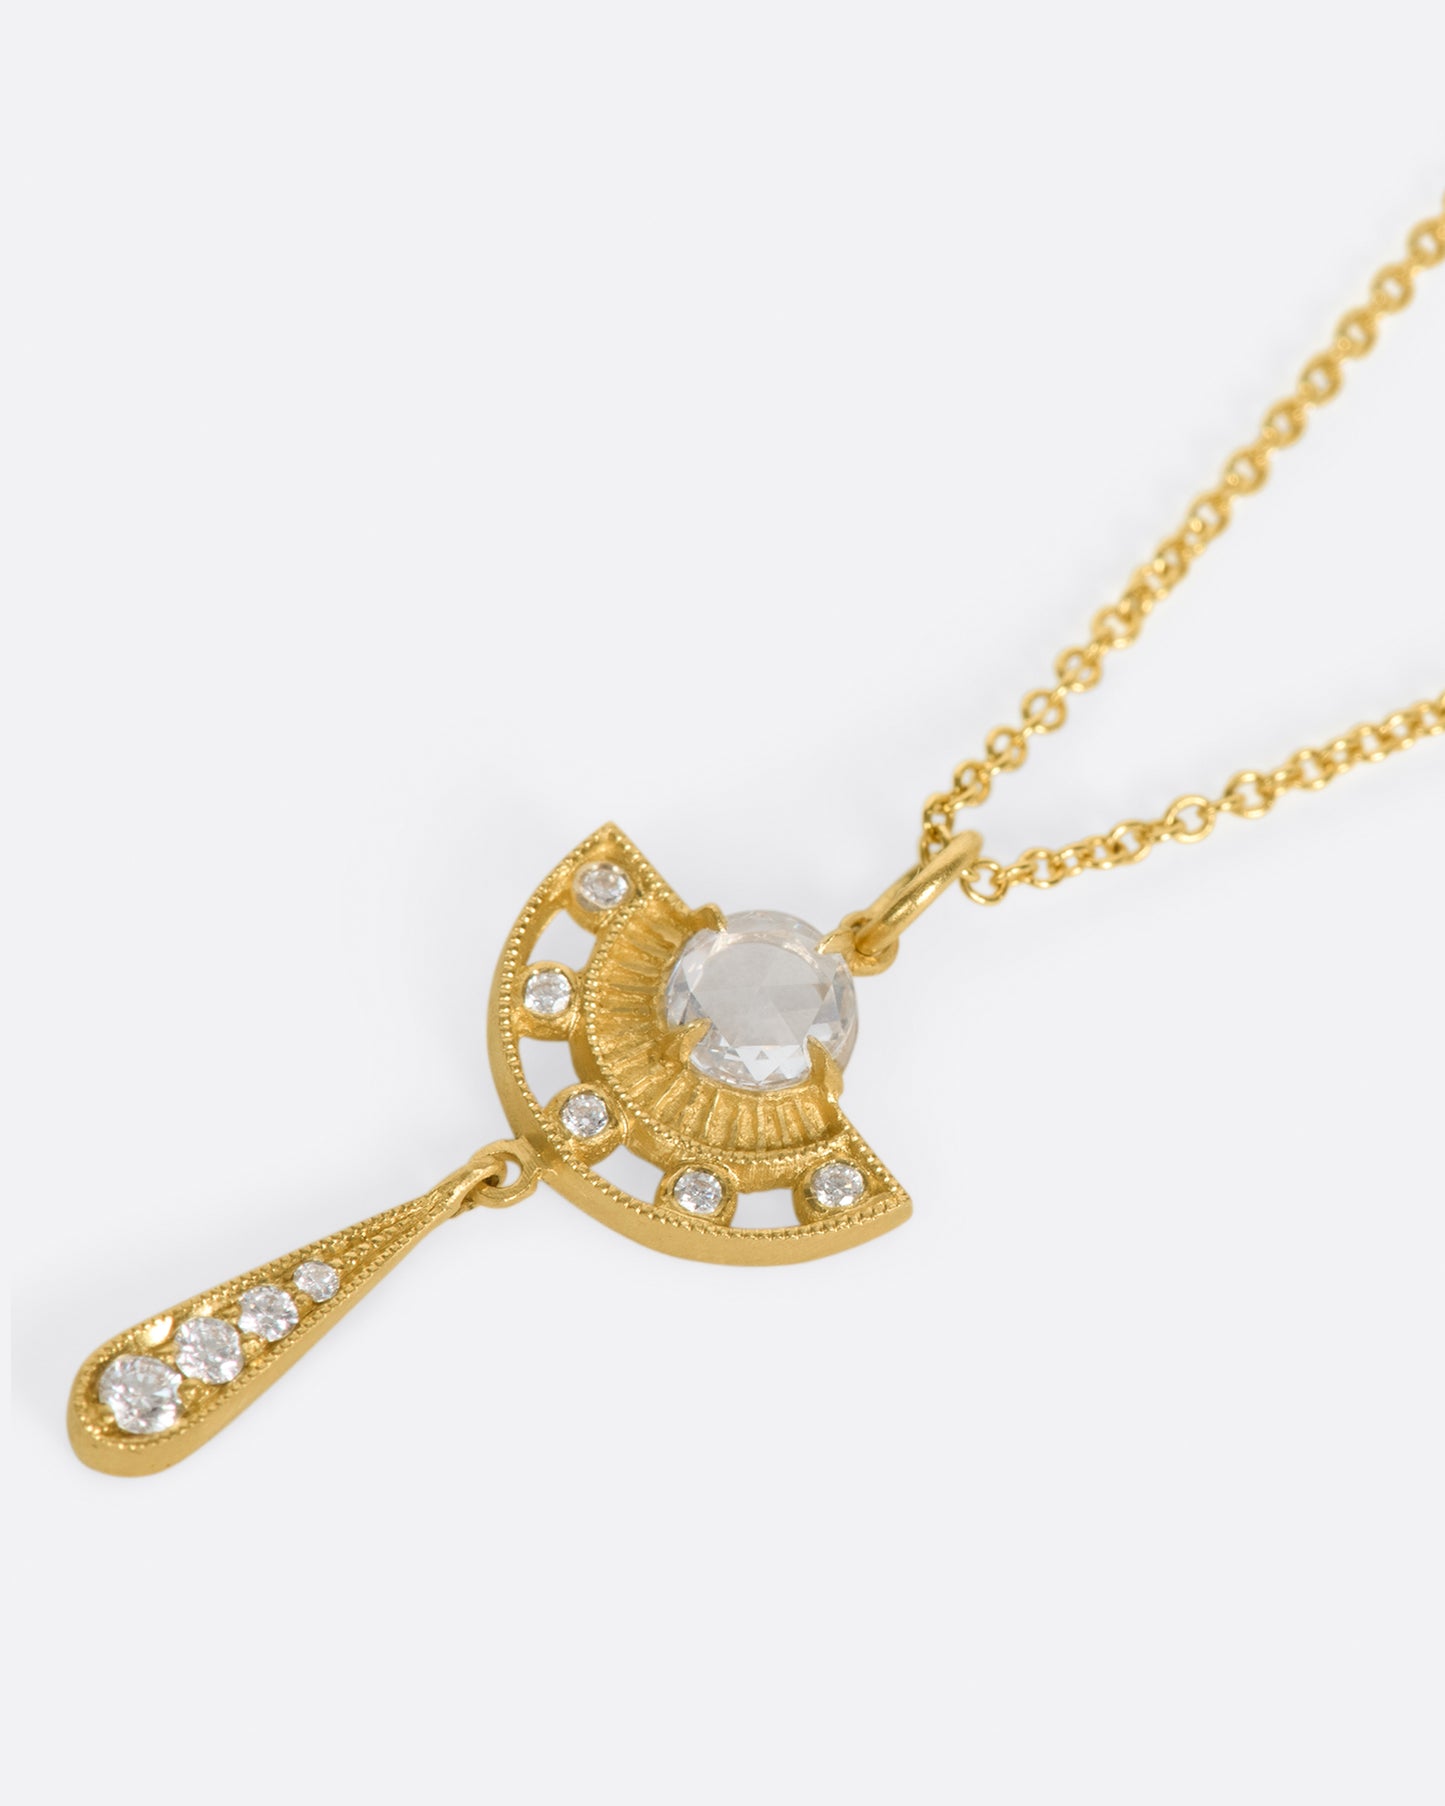 A semi circular pendant necklace with a rose cut diamond at its center and a second diamond drop, shown laying flat.